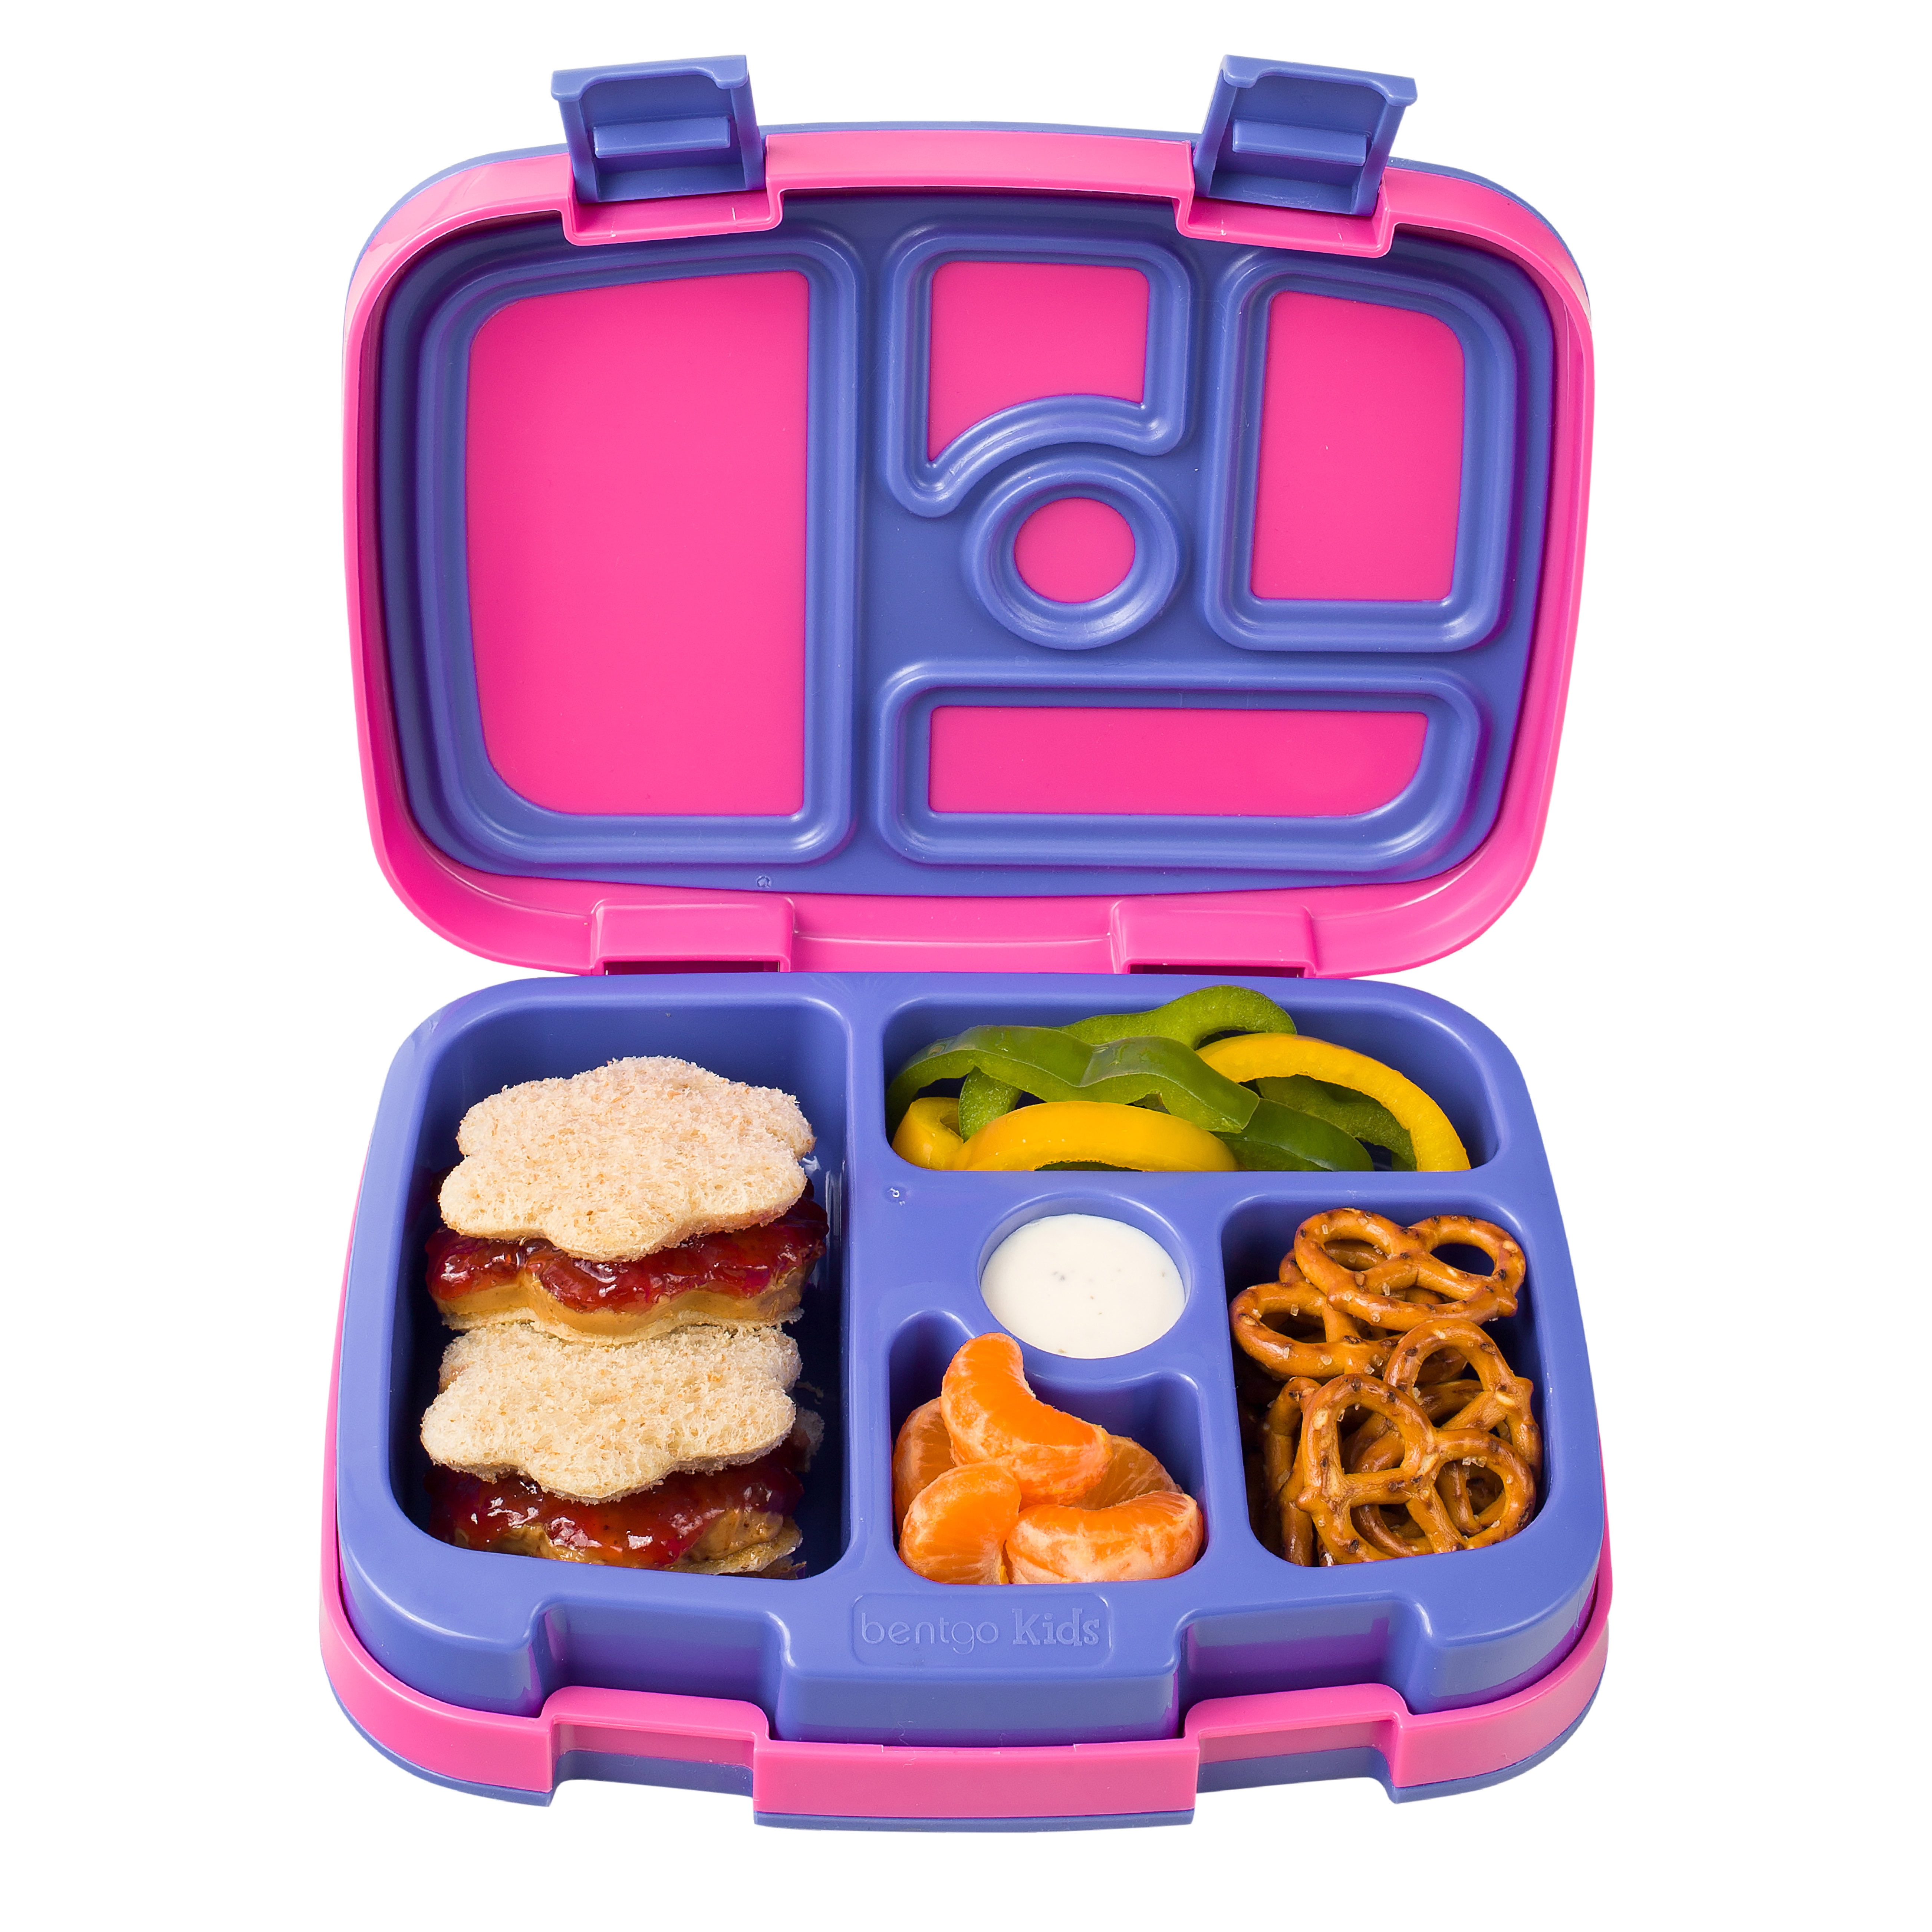 Bentgo Kids' Lunch Box Review: A Great Value